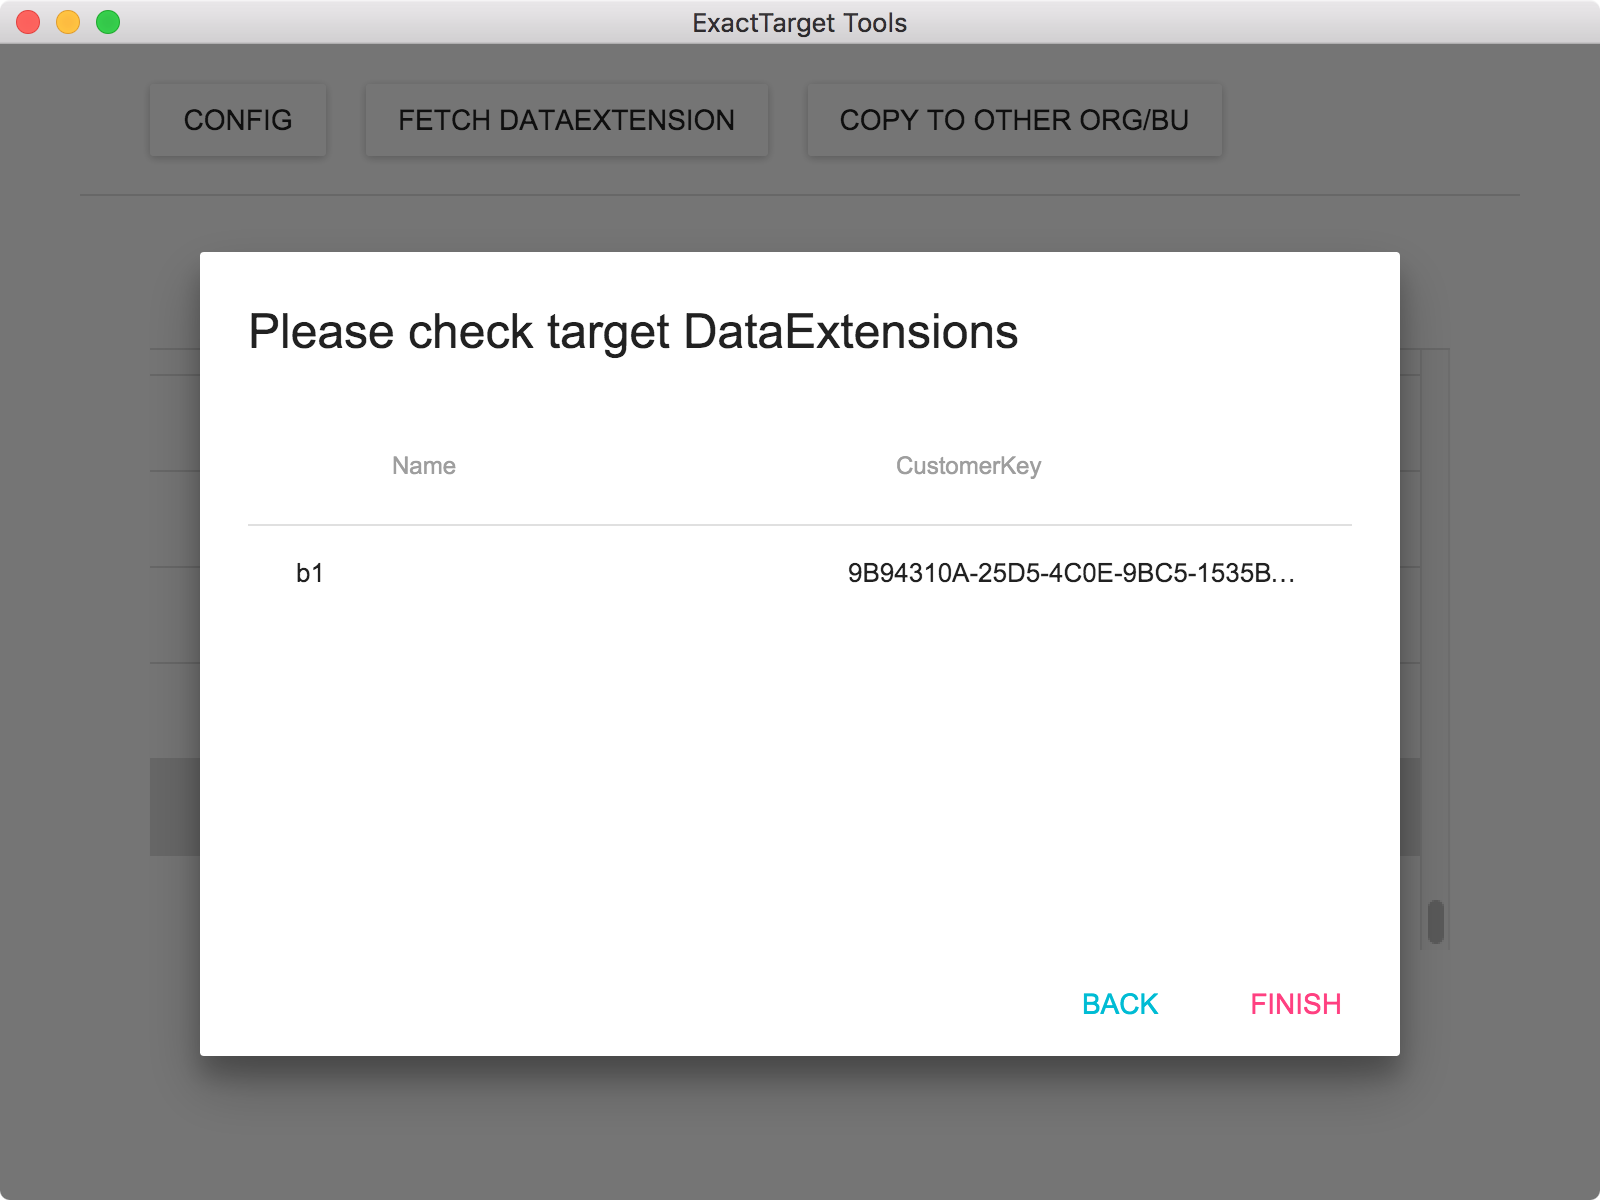 Check Target DataExtensions